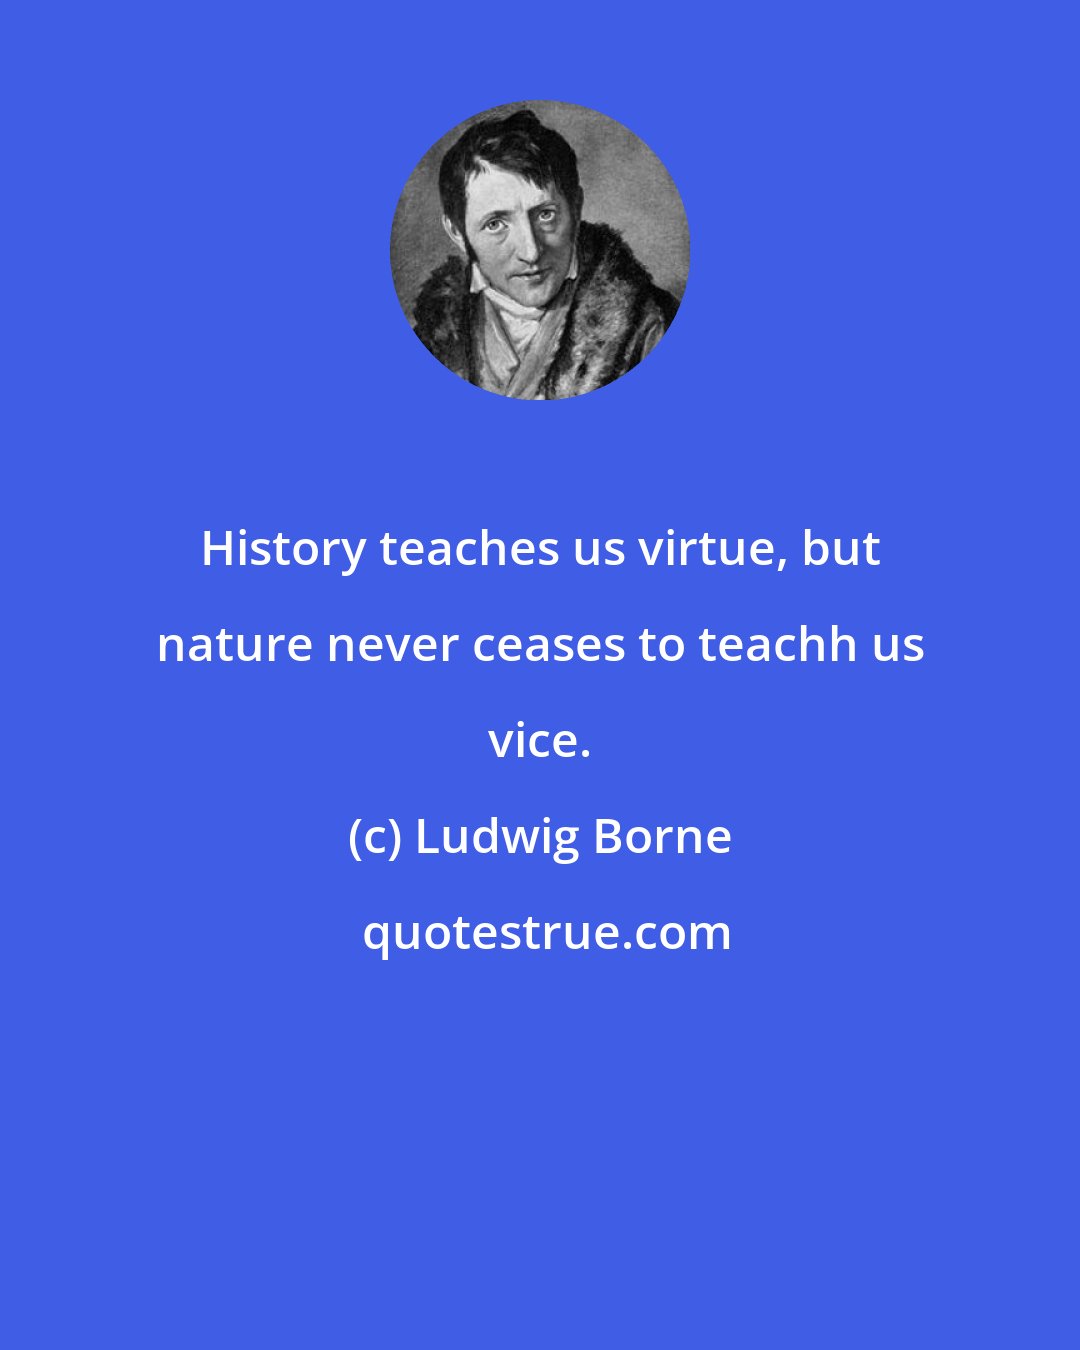 Ludwig Borne: History teaches us virtue, but nature never ceases to teachh us vice.